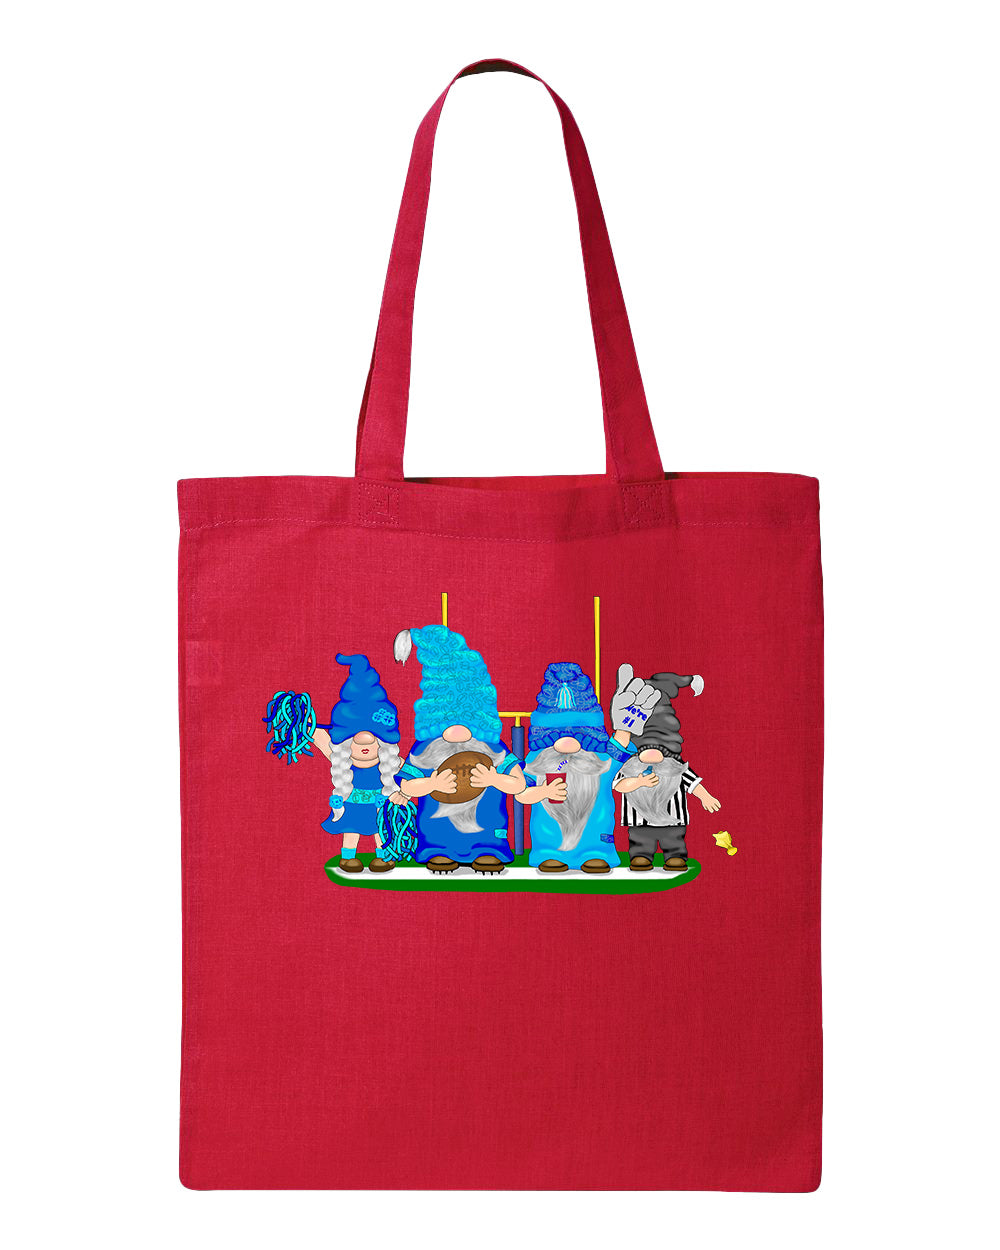 Navy & Blue Football Gnomes  (similar to Tennessee) on Tote